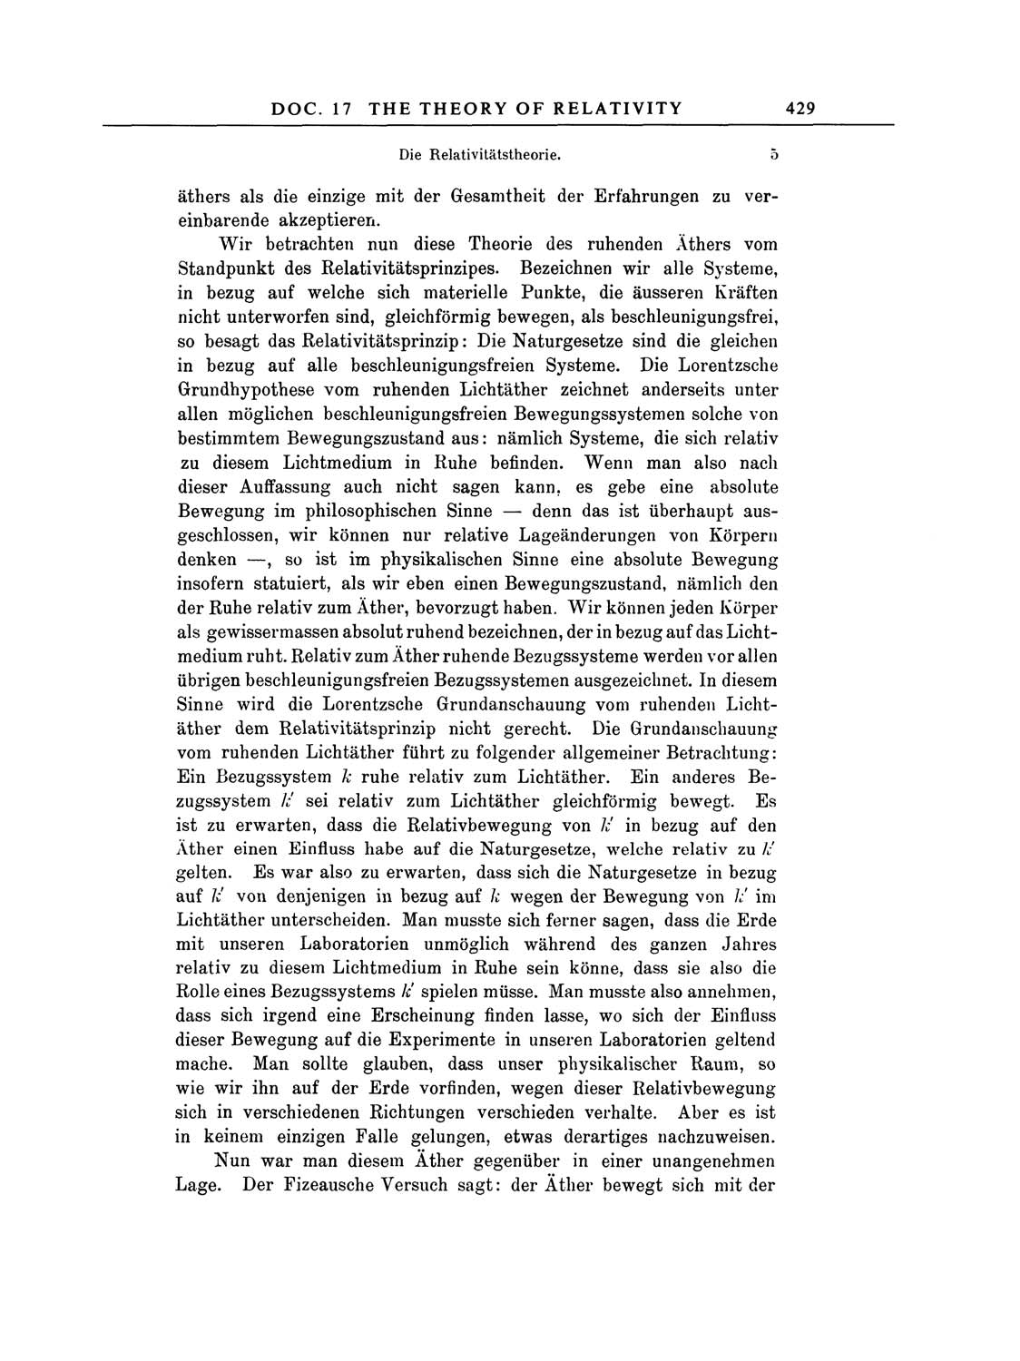 Volume 3: The Swiss Years: Writings 1909-1911 page 429